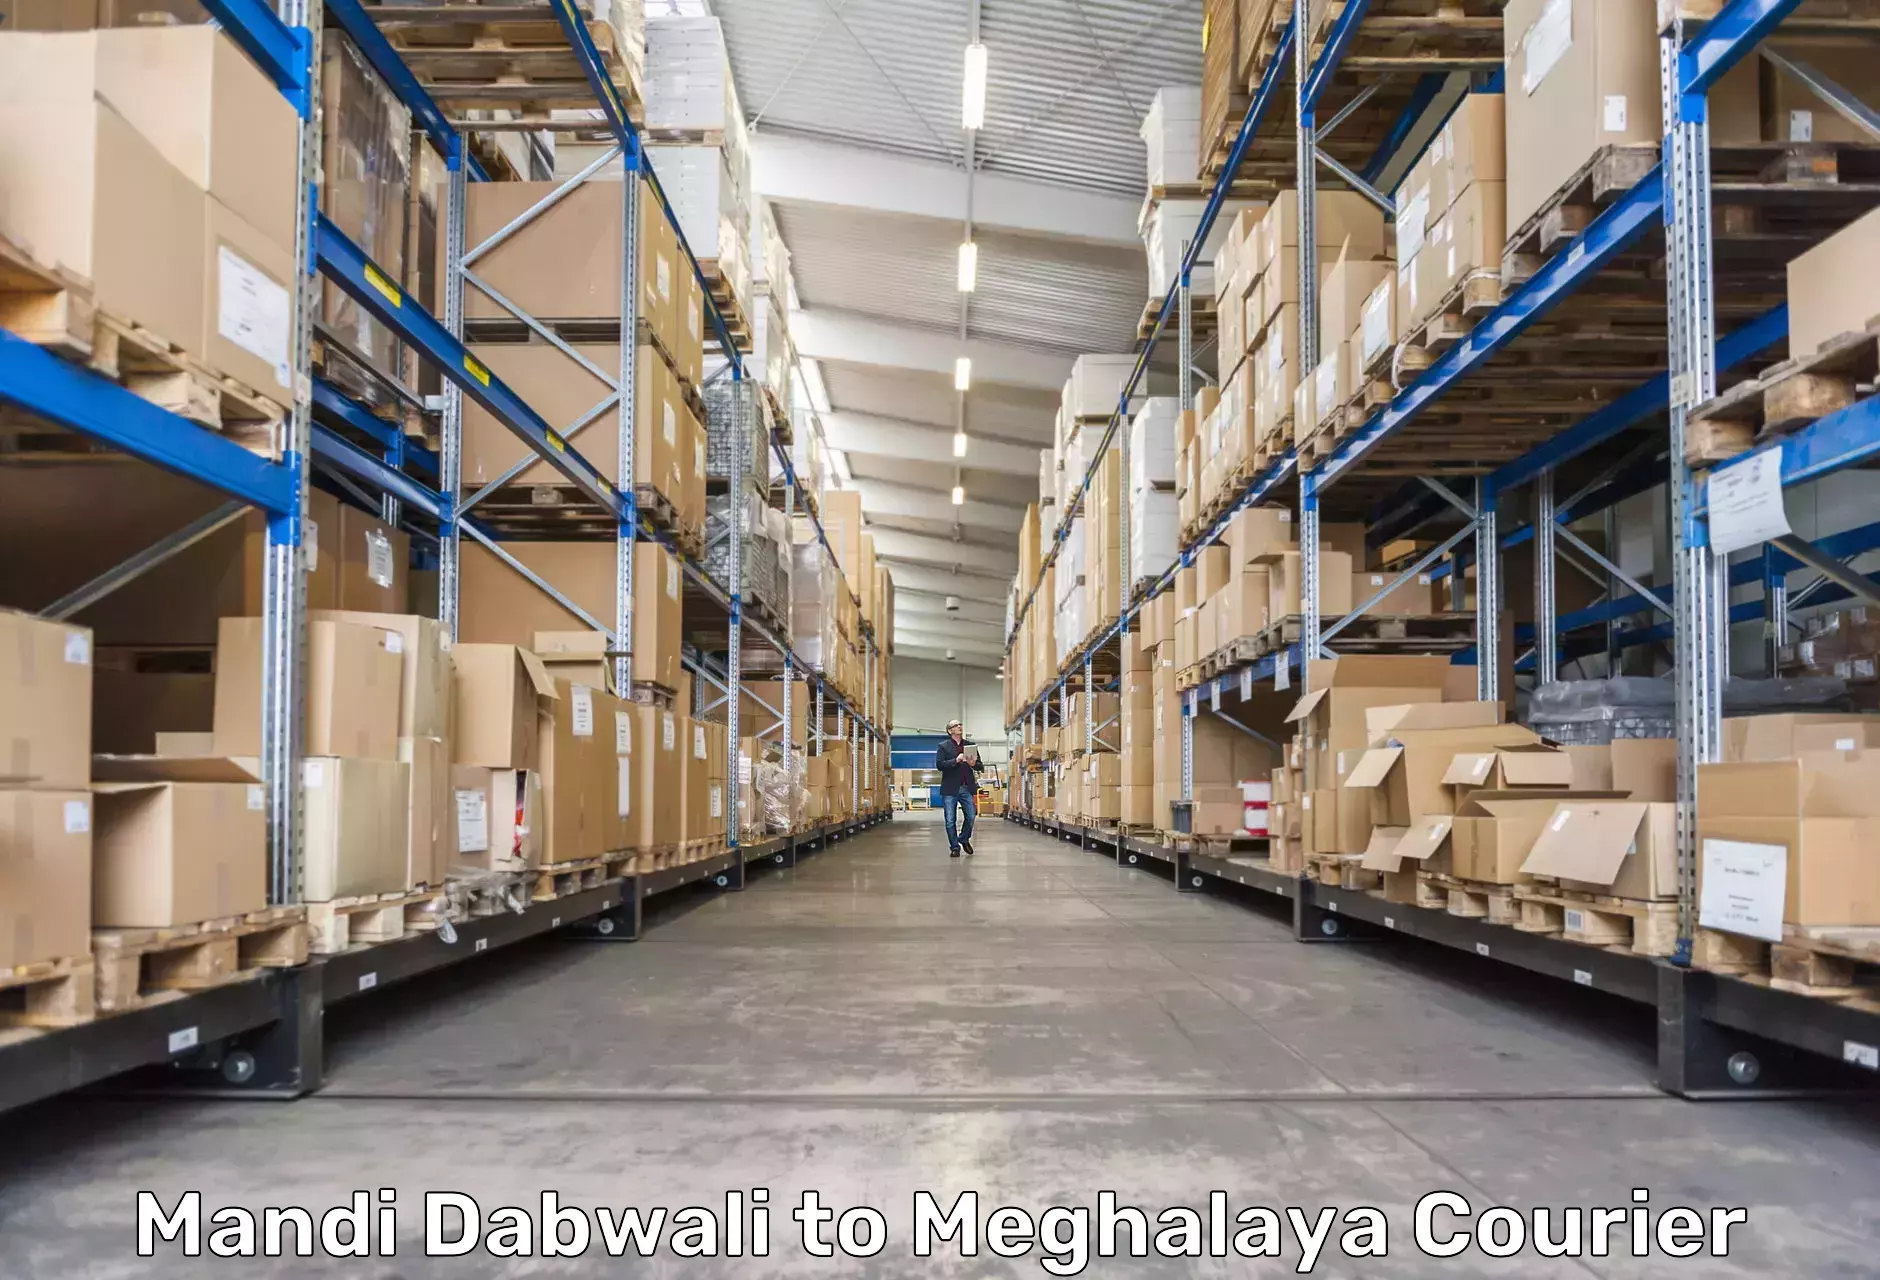 Global courier networks Mandi Dabwali to Tura